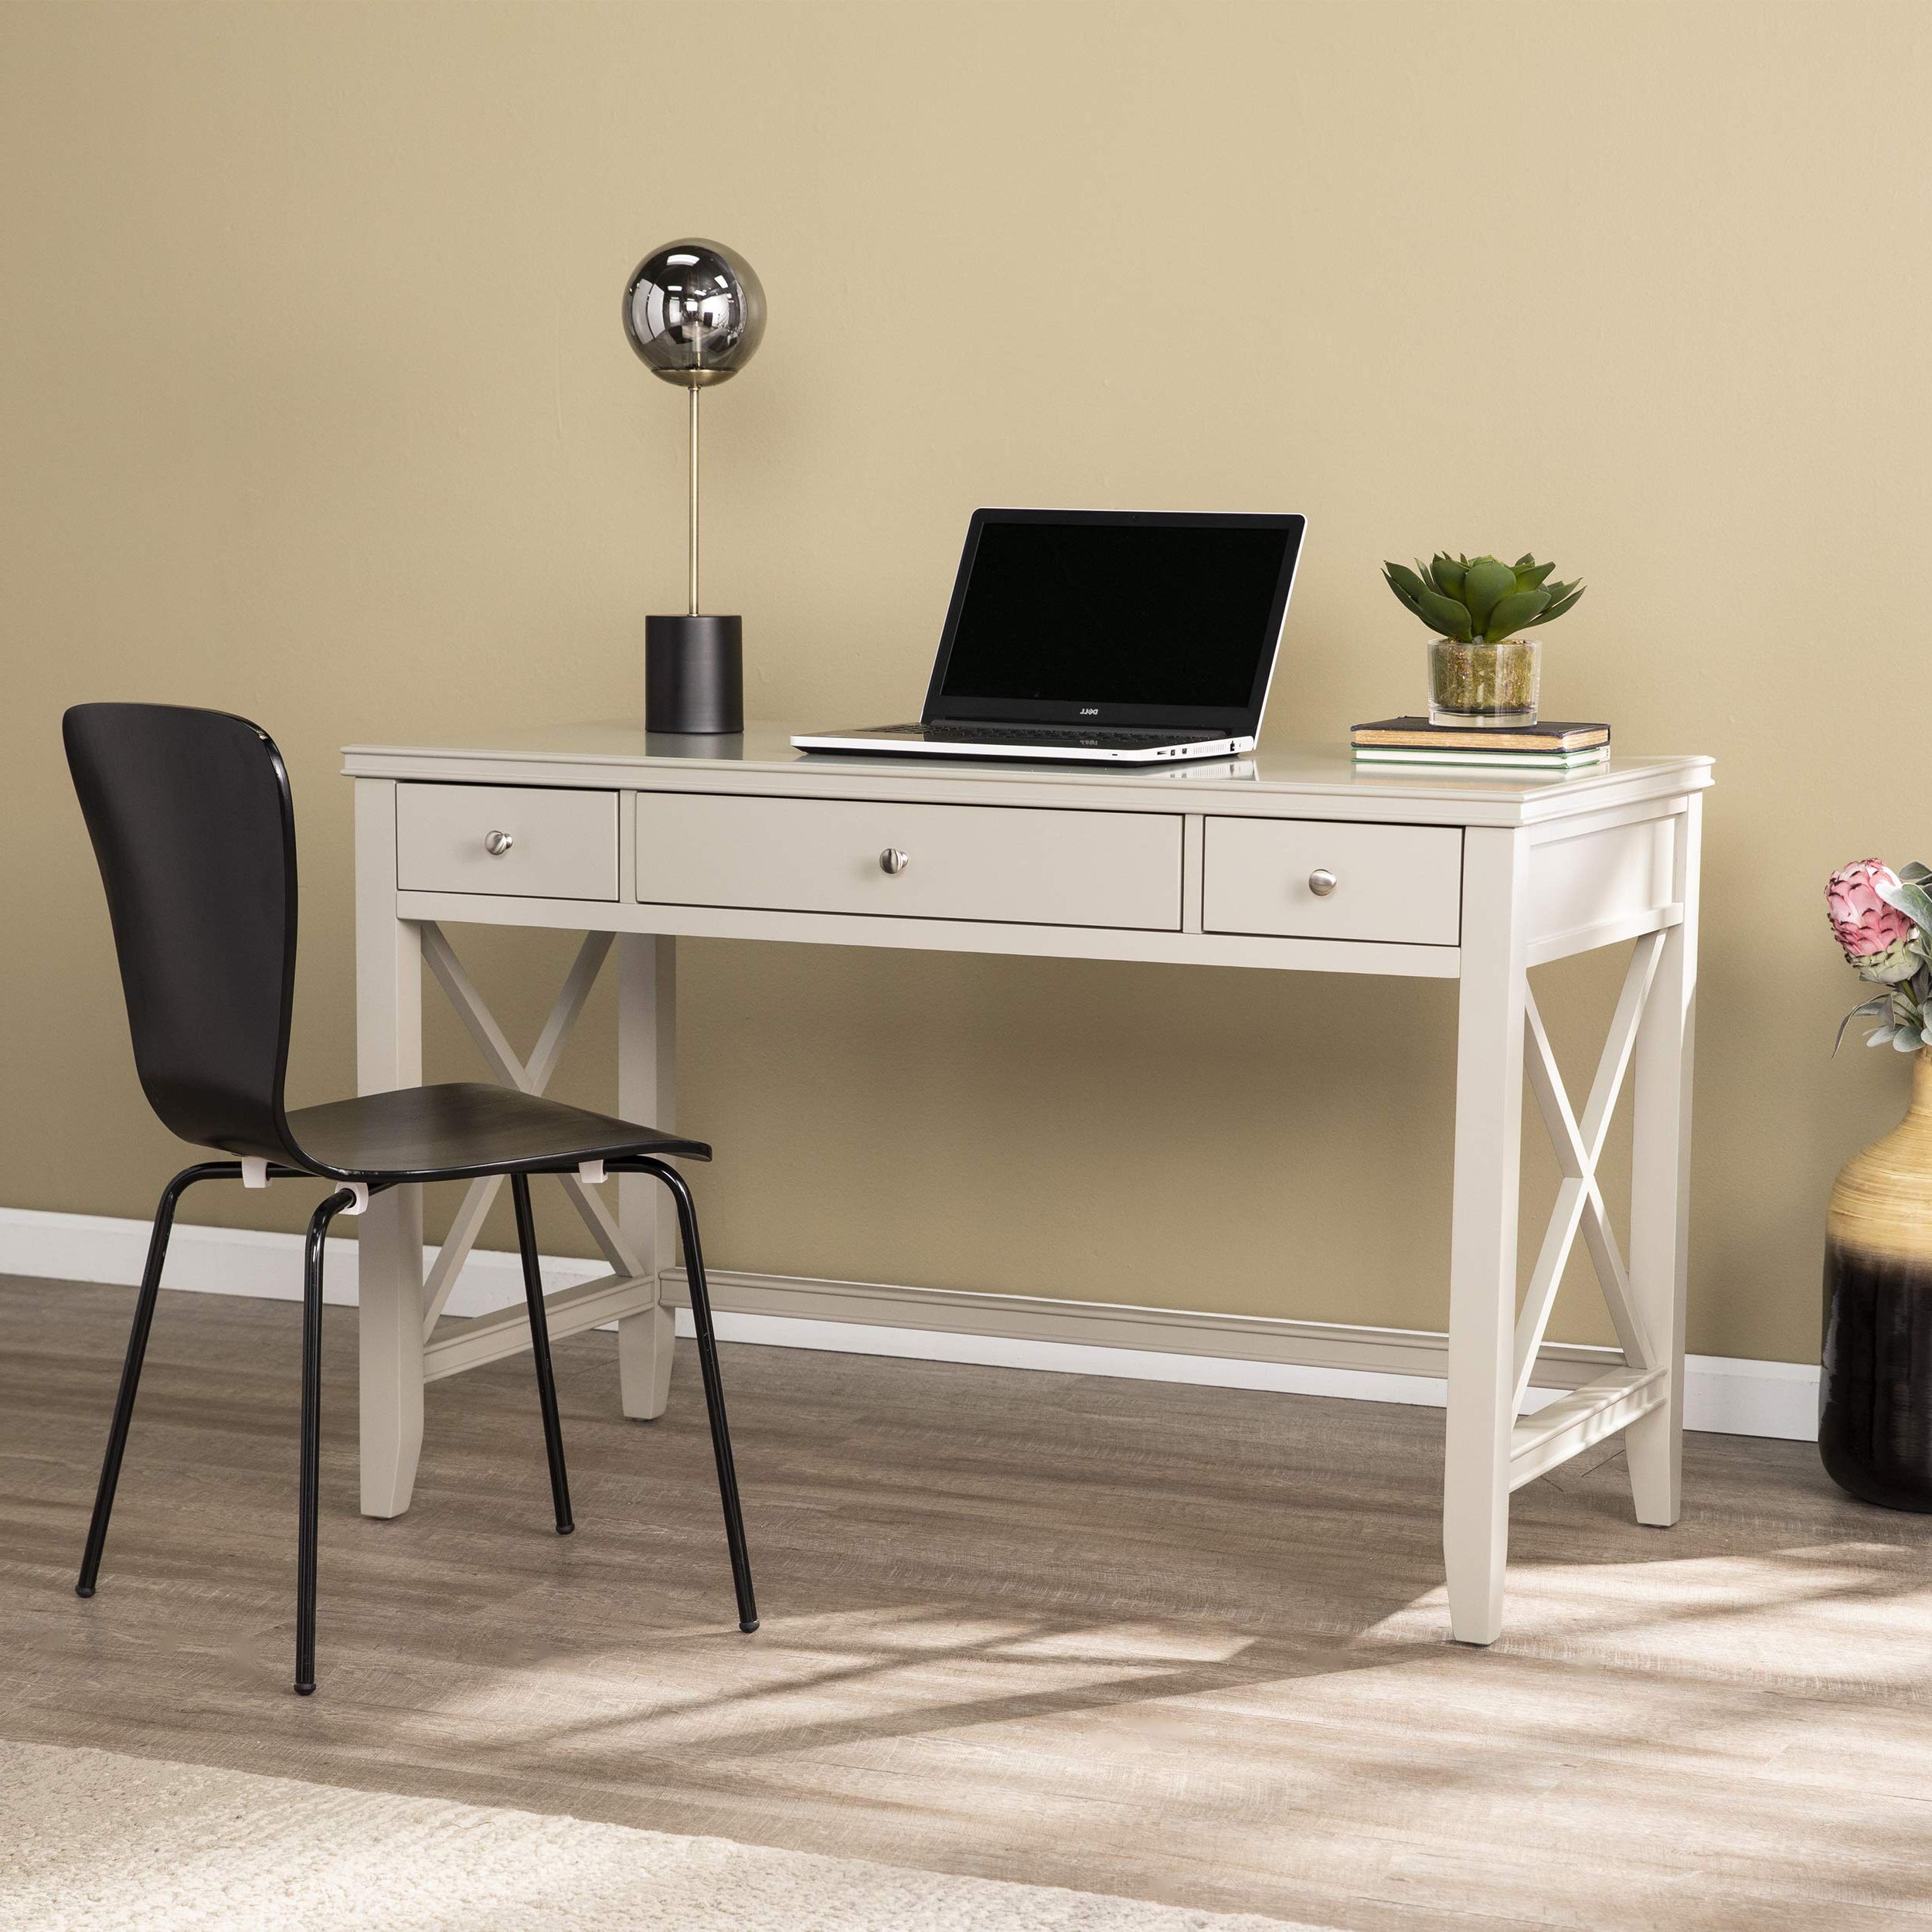 Widely Used Southern Enterprises Larksmill Coffee Tables For Amazon: Sei Furniture Larksmill Writing Desk, Gray, Brushed Silver :  Home & Kitchen (View 5 of 10)